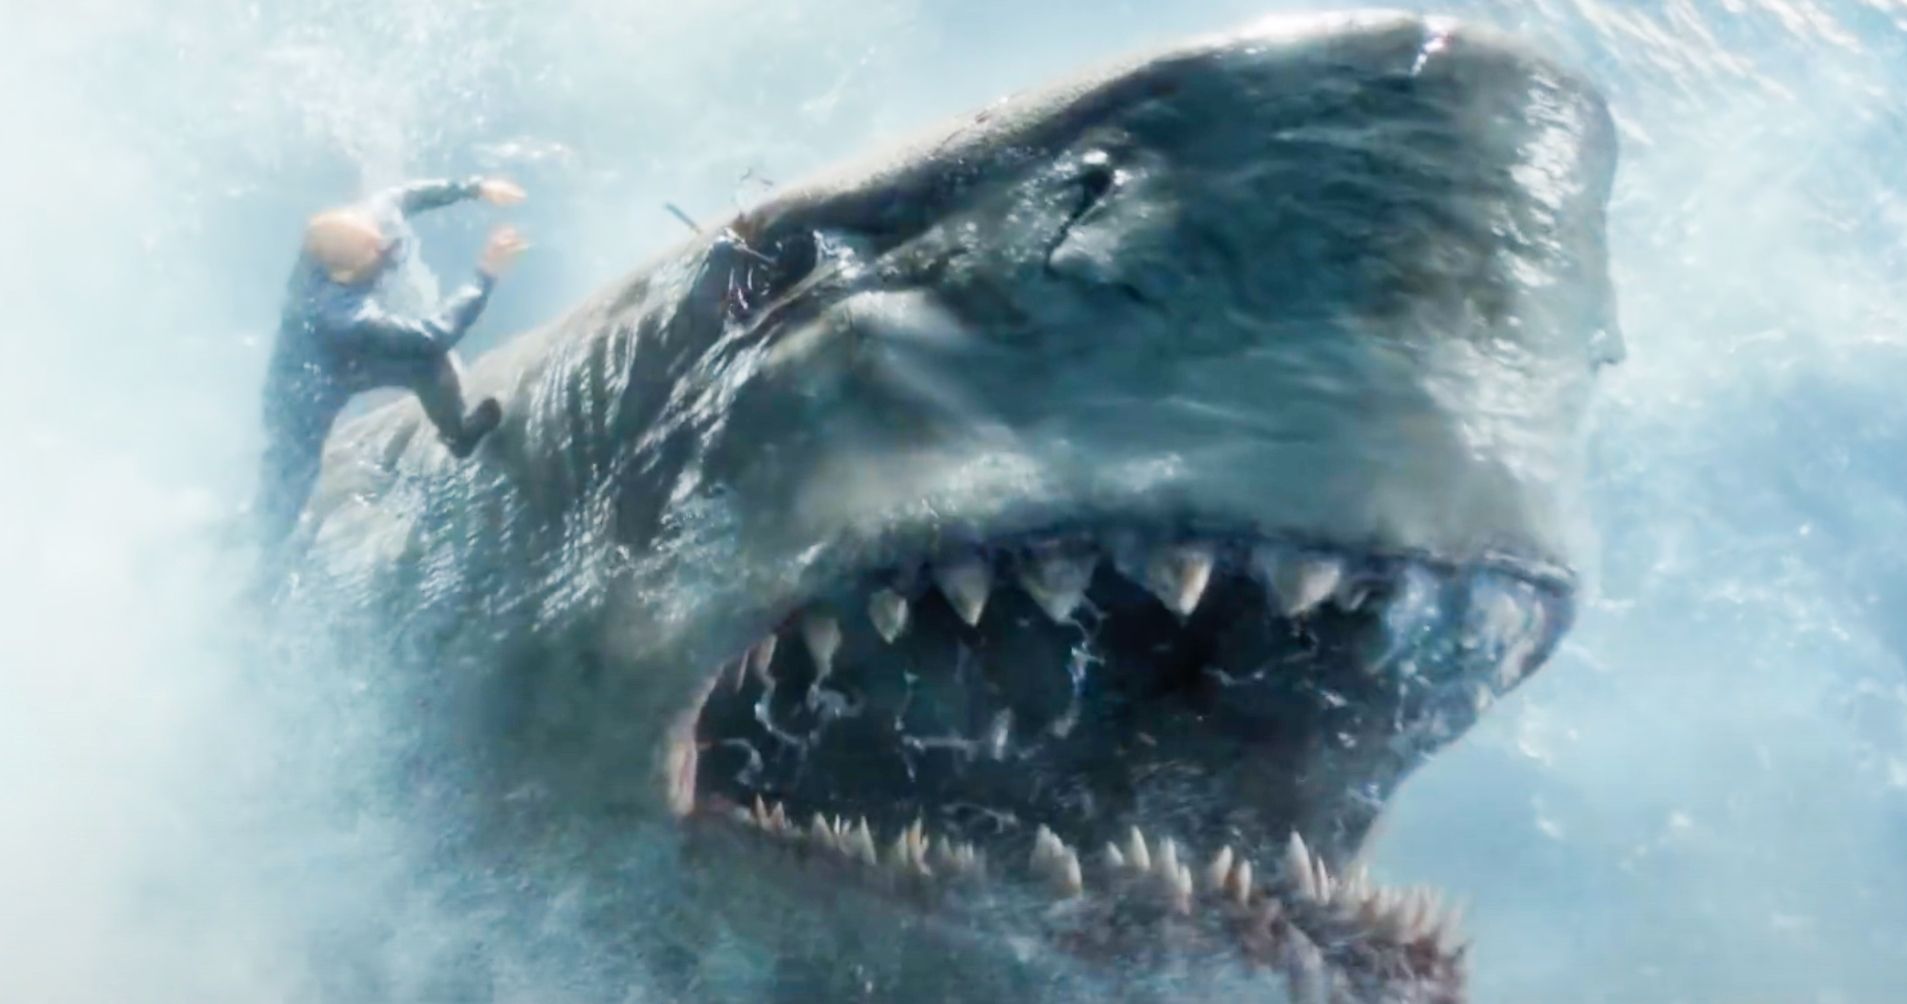 The Meg 2 Begins Filming in Early 2022, Jason Statham Will Return to Punch More Sharks